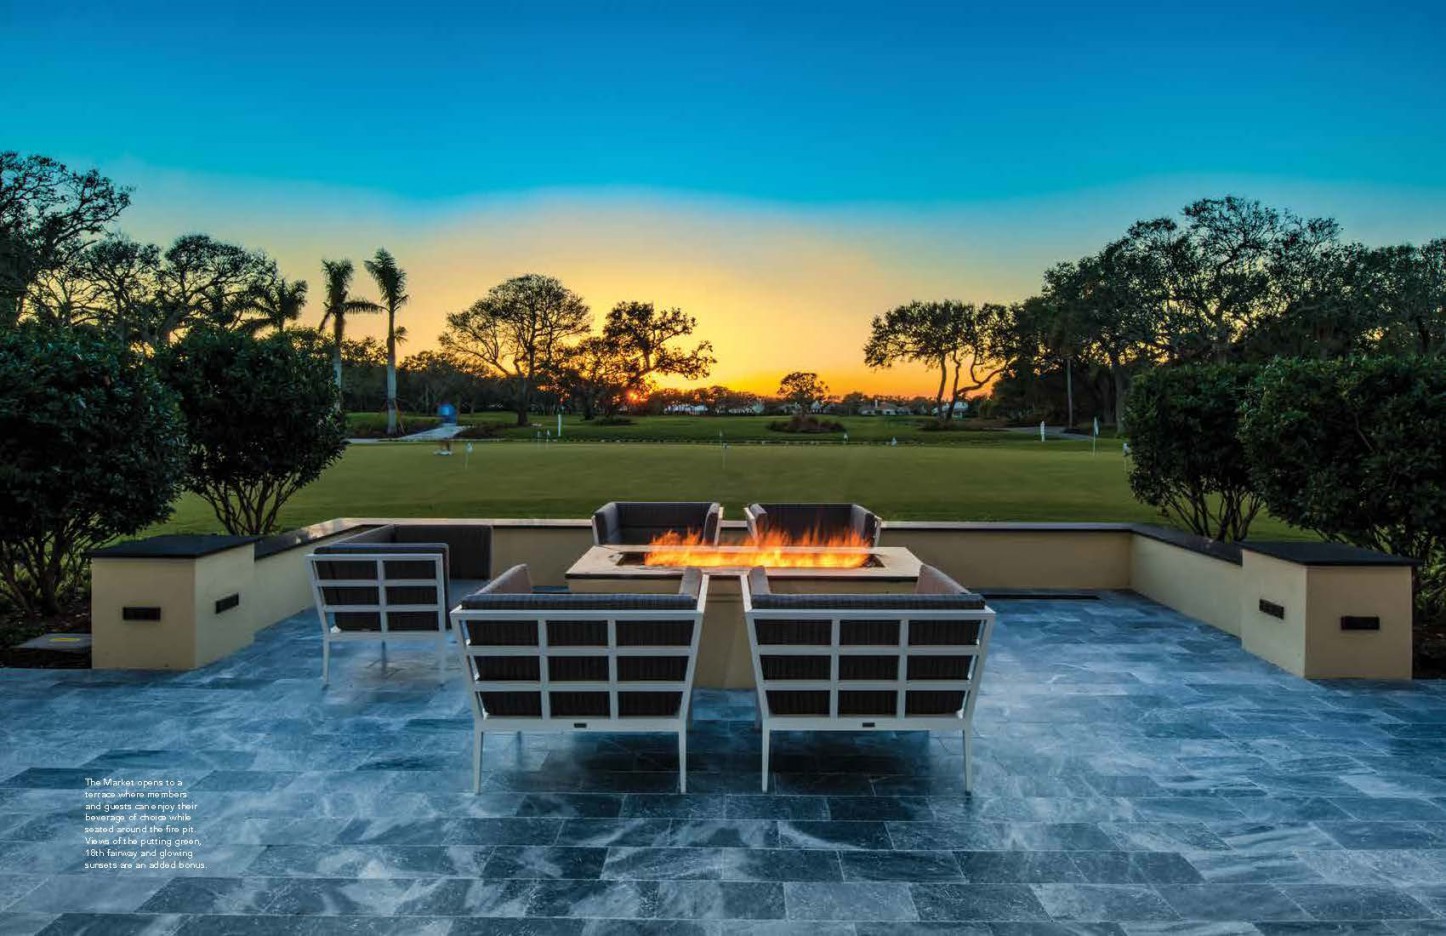 john's island club firepit with furnishings sourced by j banks design group is featured in Vero Beach magazine